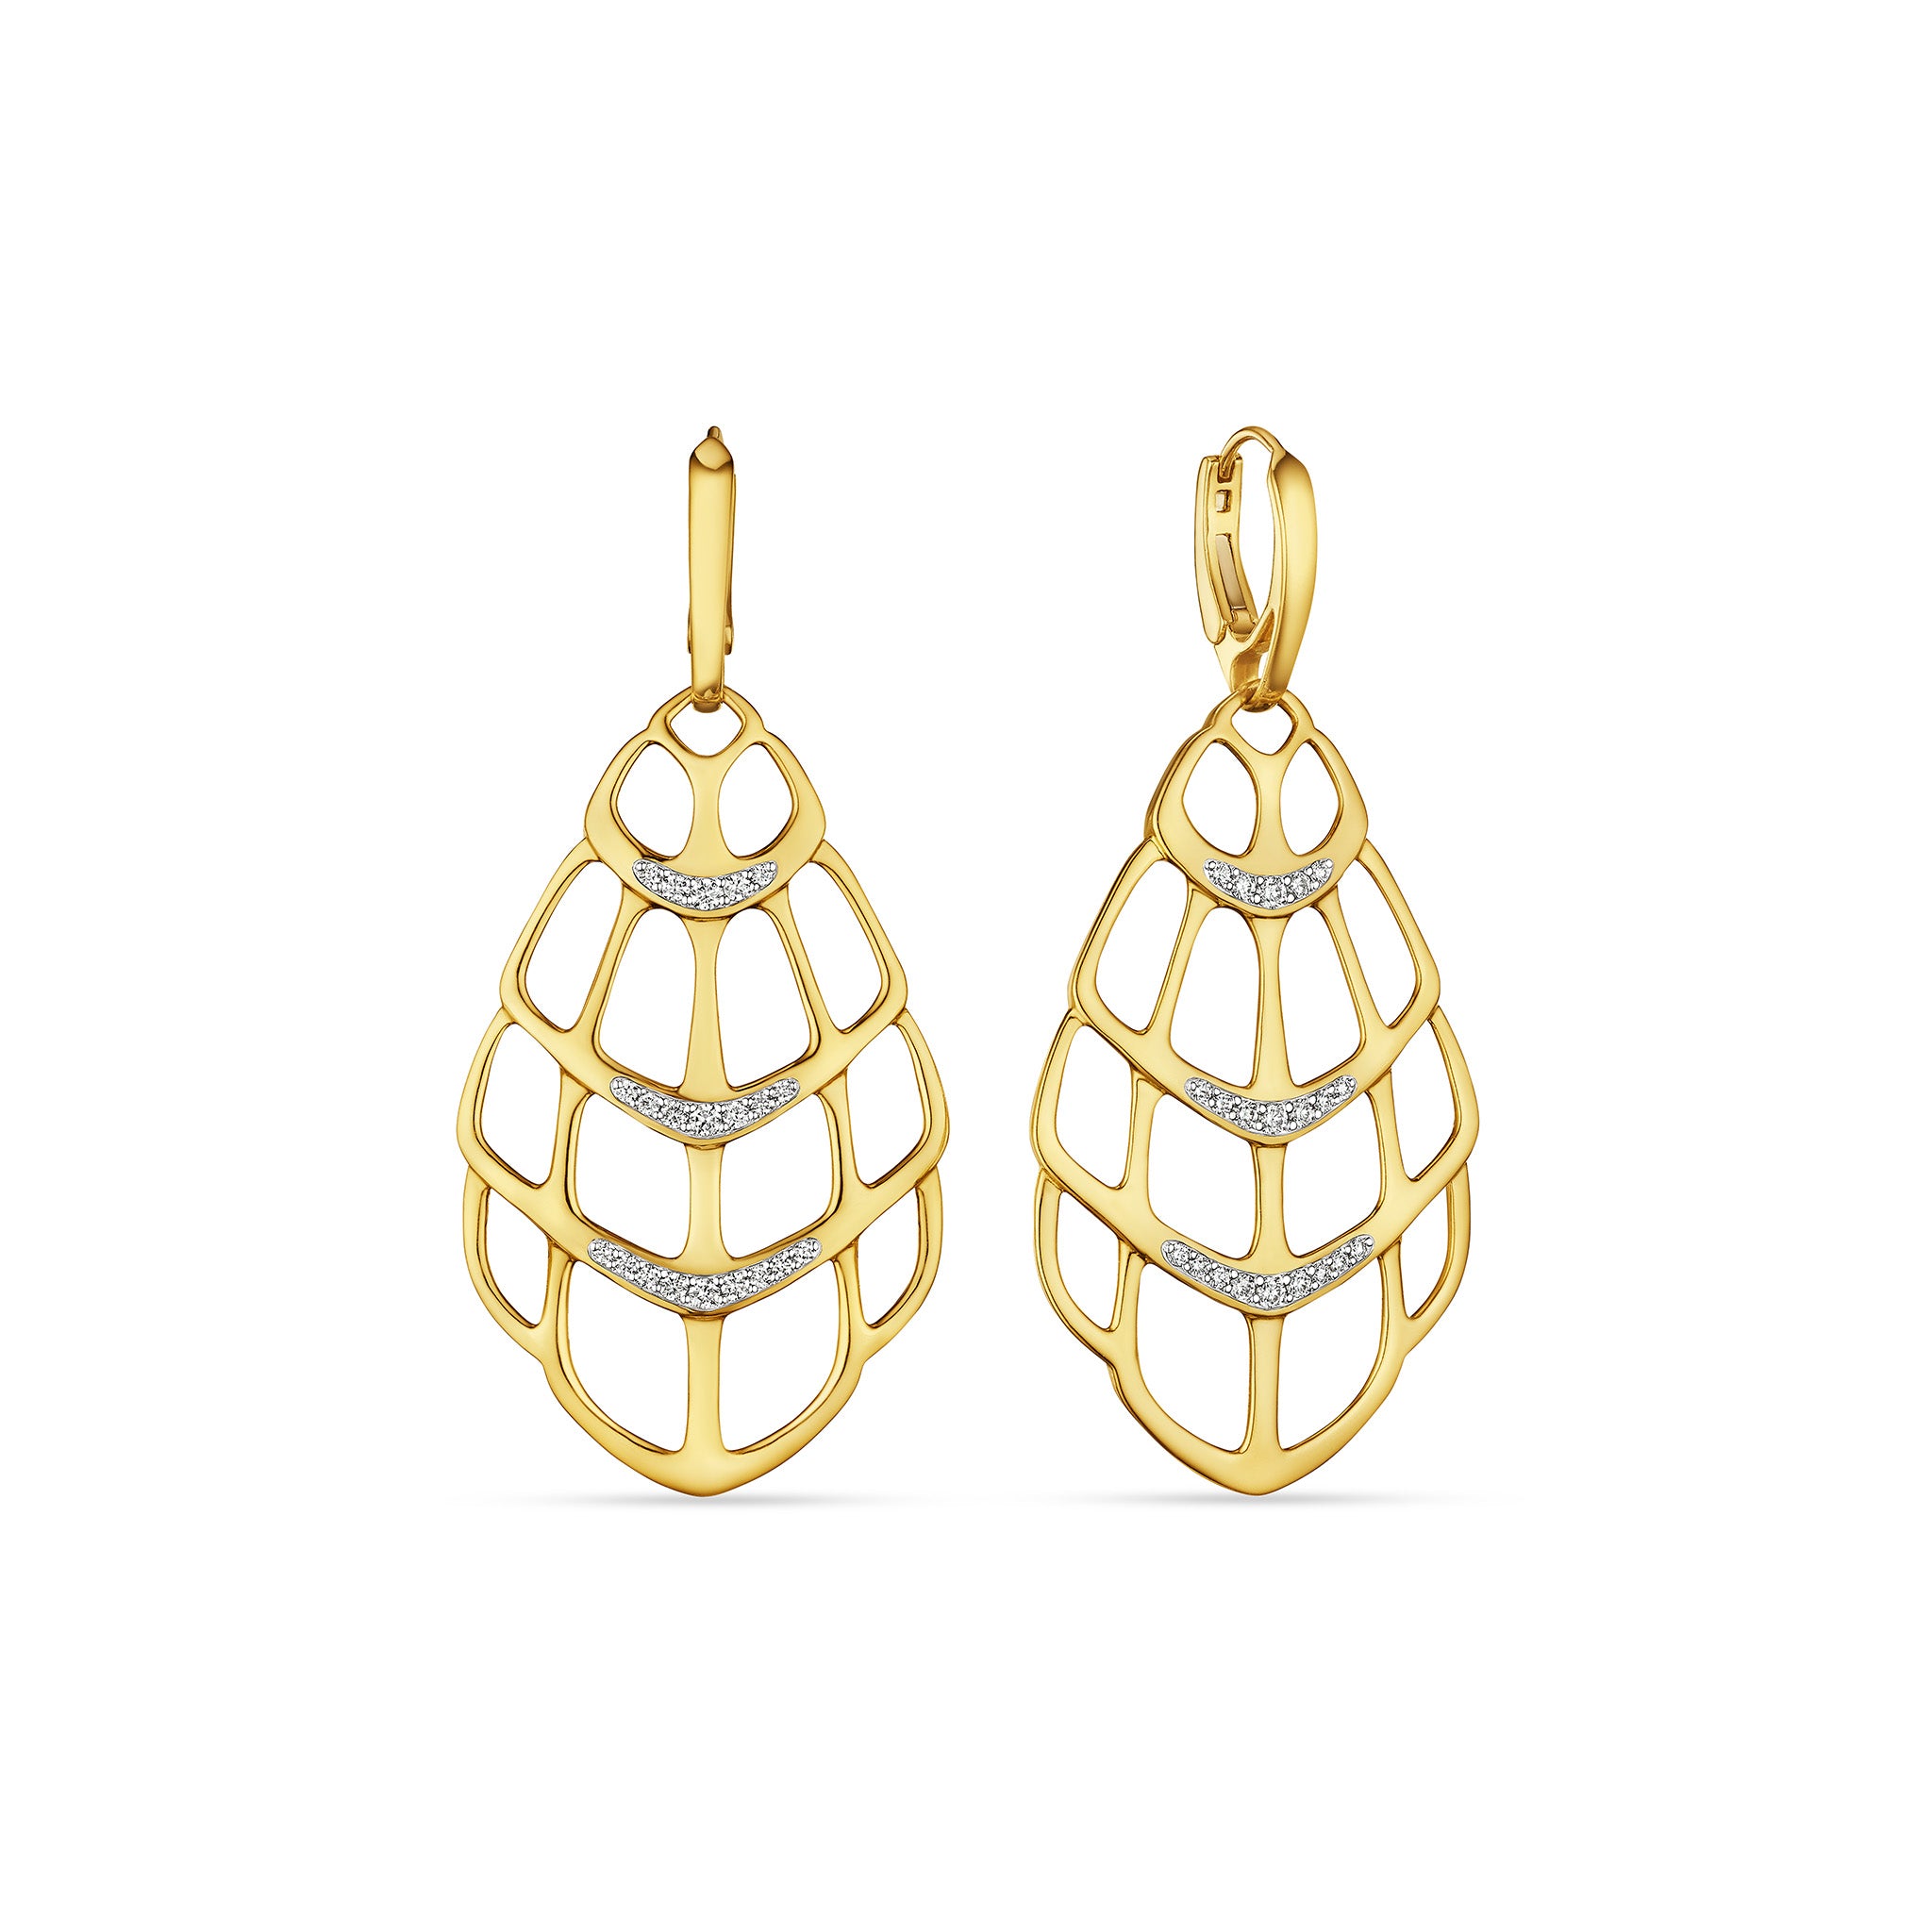 Selvaggia Drama Earrings With Diamonds In 14K